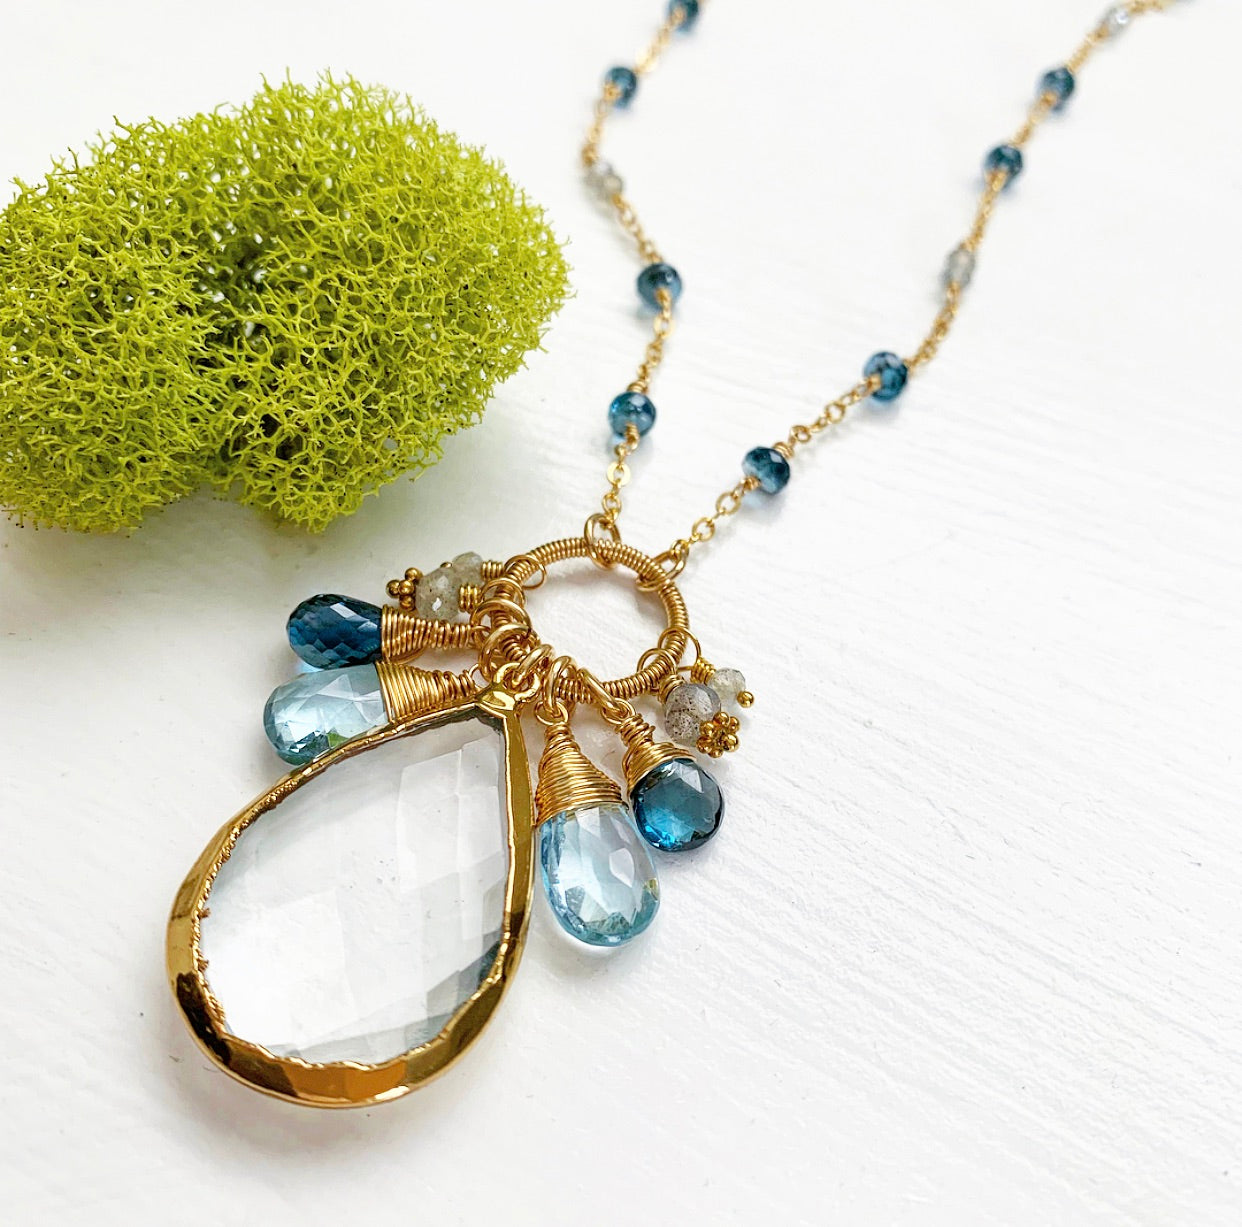 709-One of a Kind Gemstone Drop Necklace